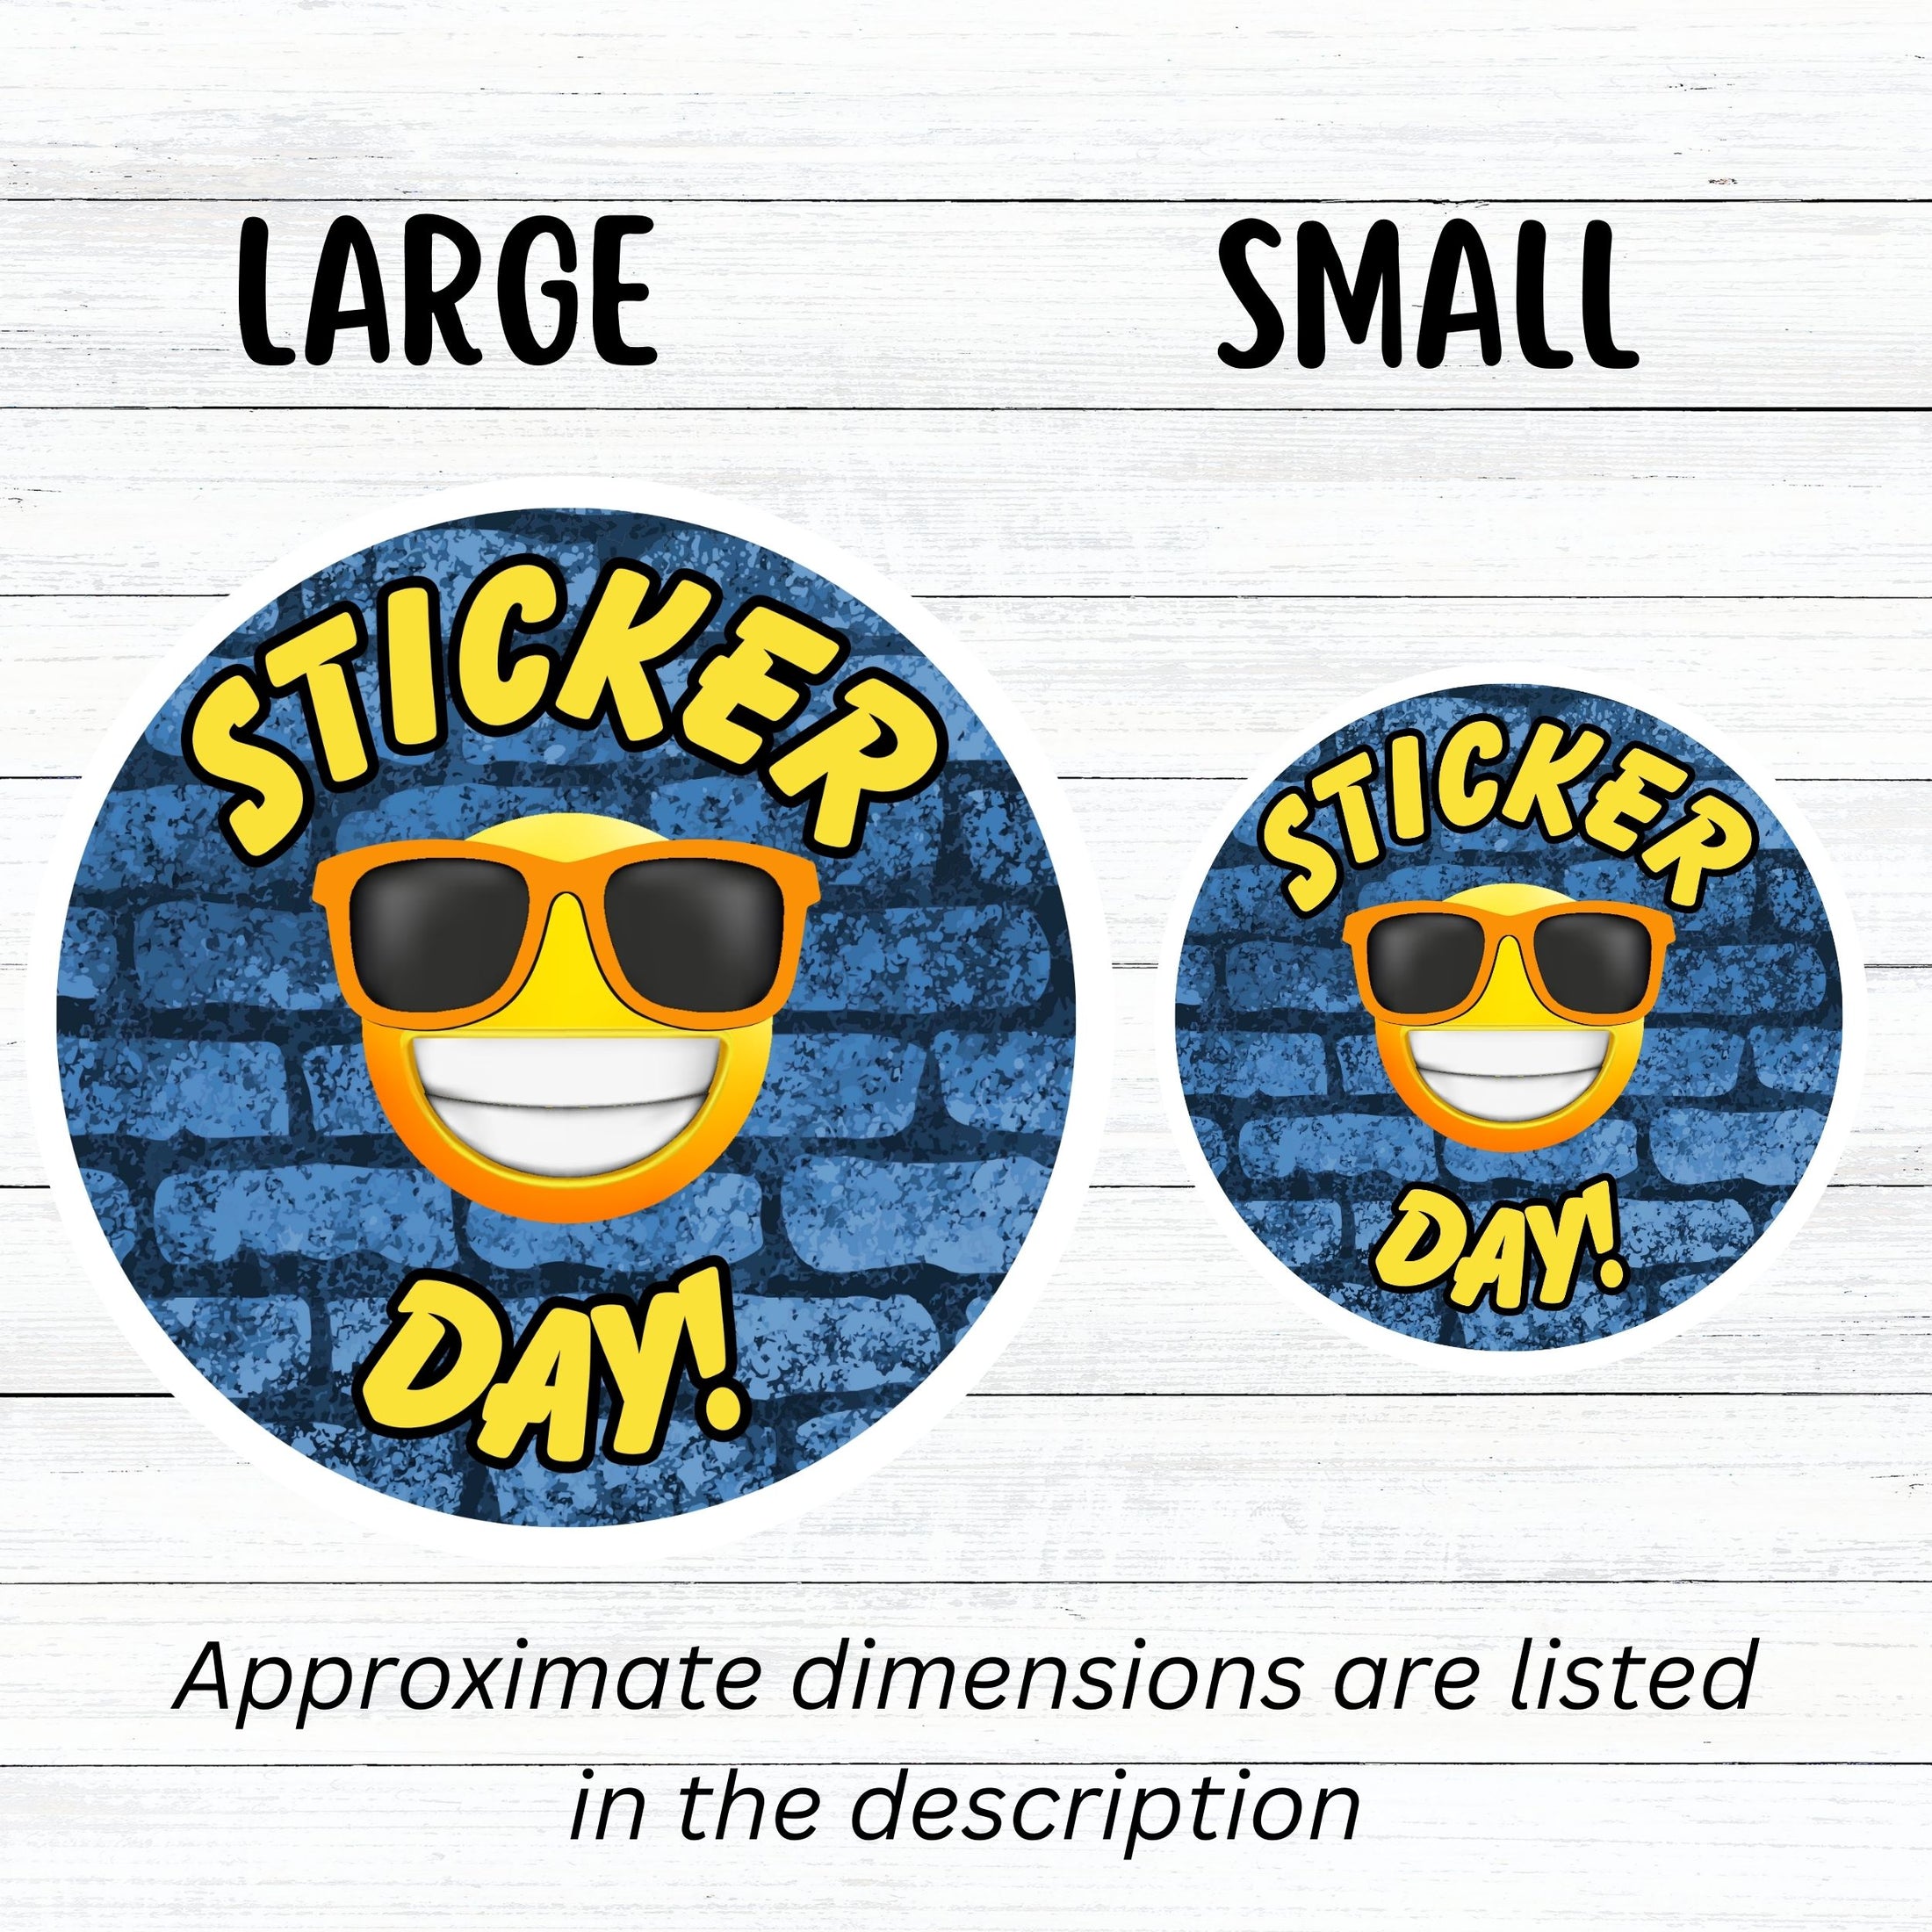 This image shows large and small Sticker Day! stickers next to each other.